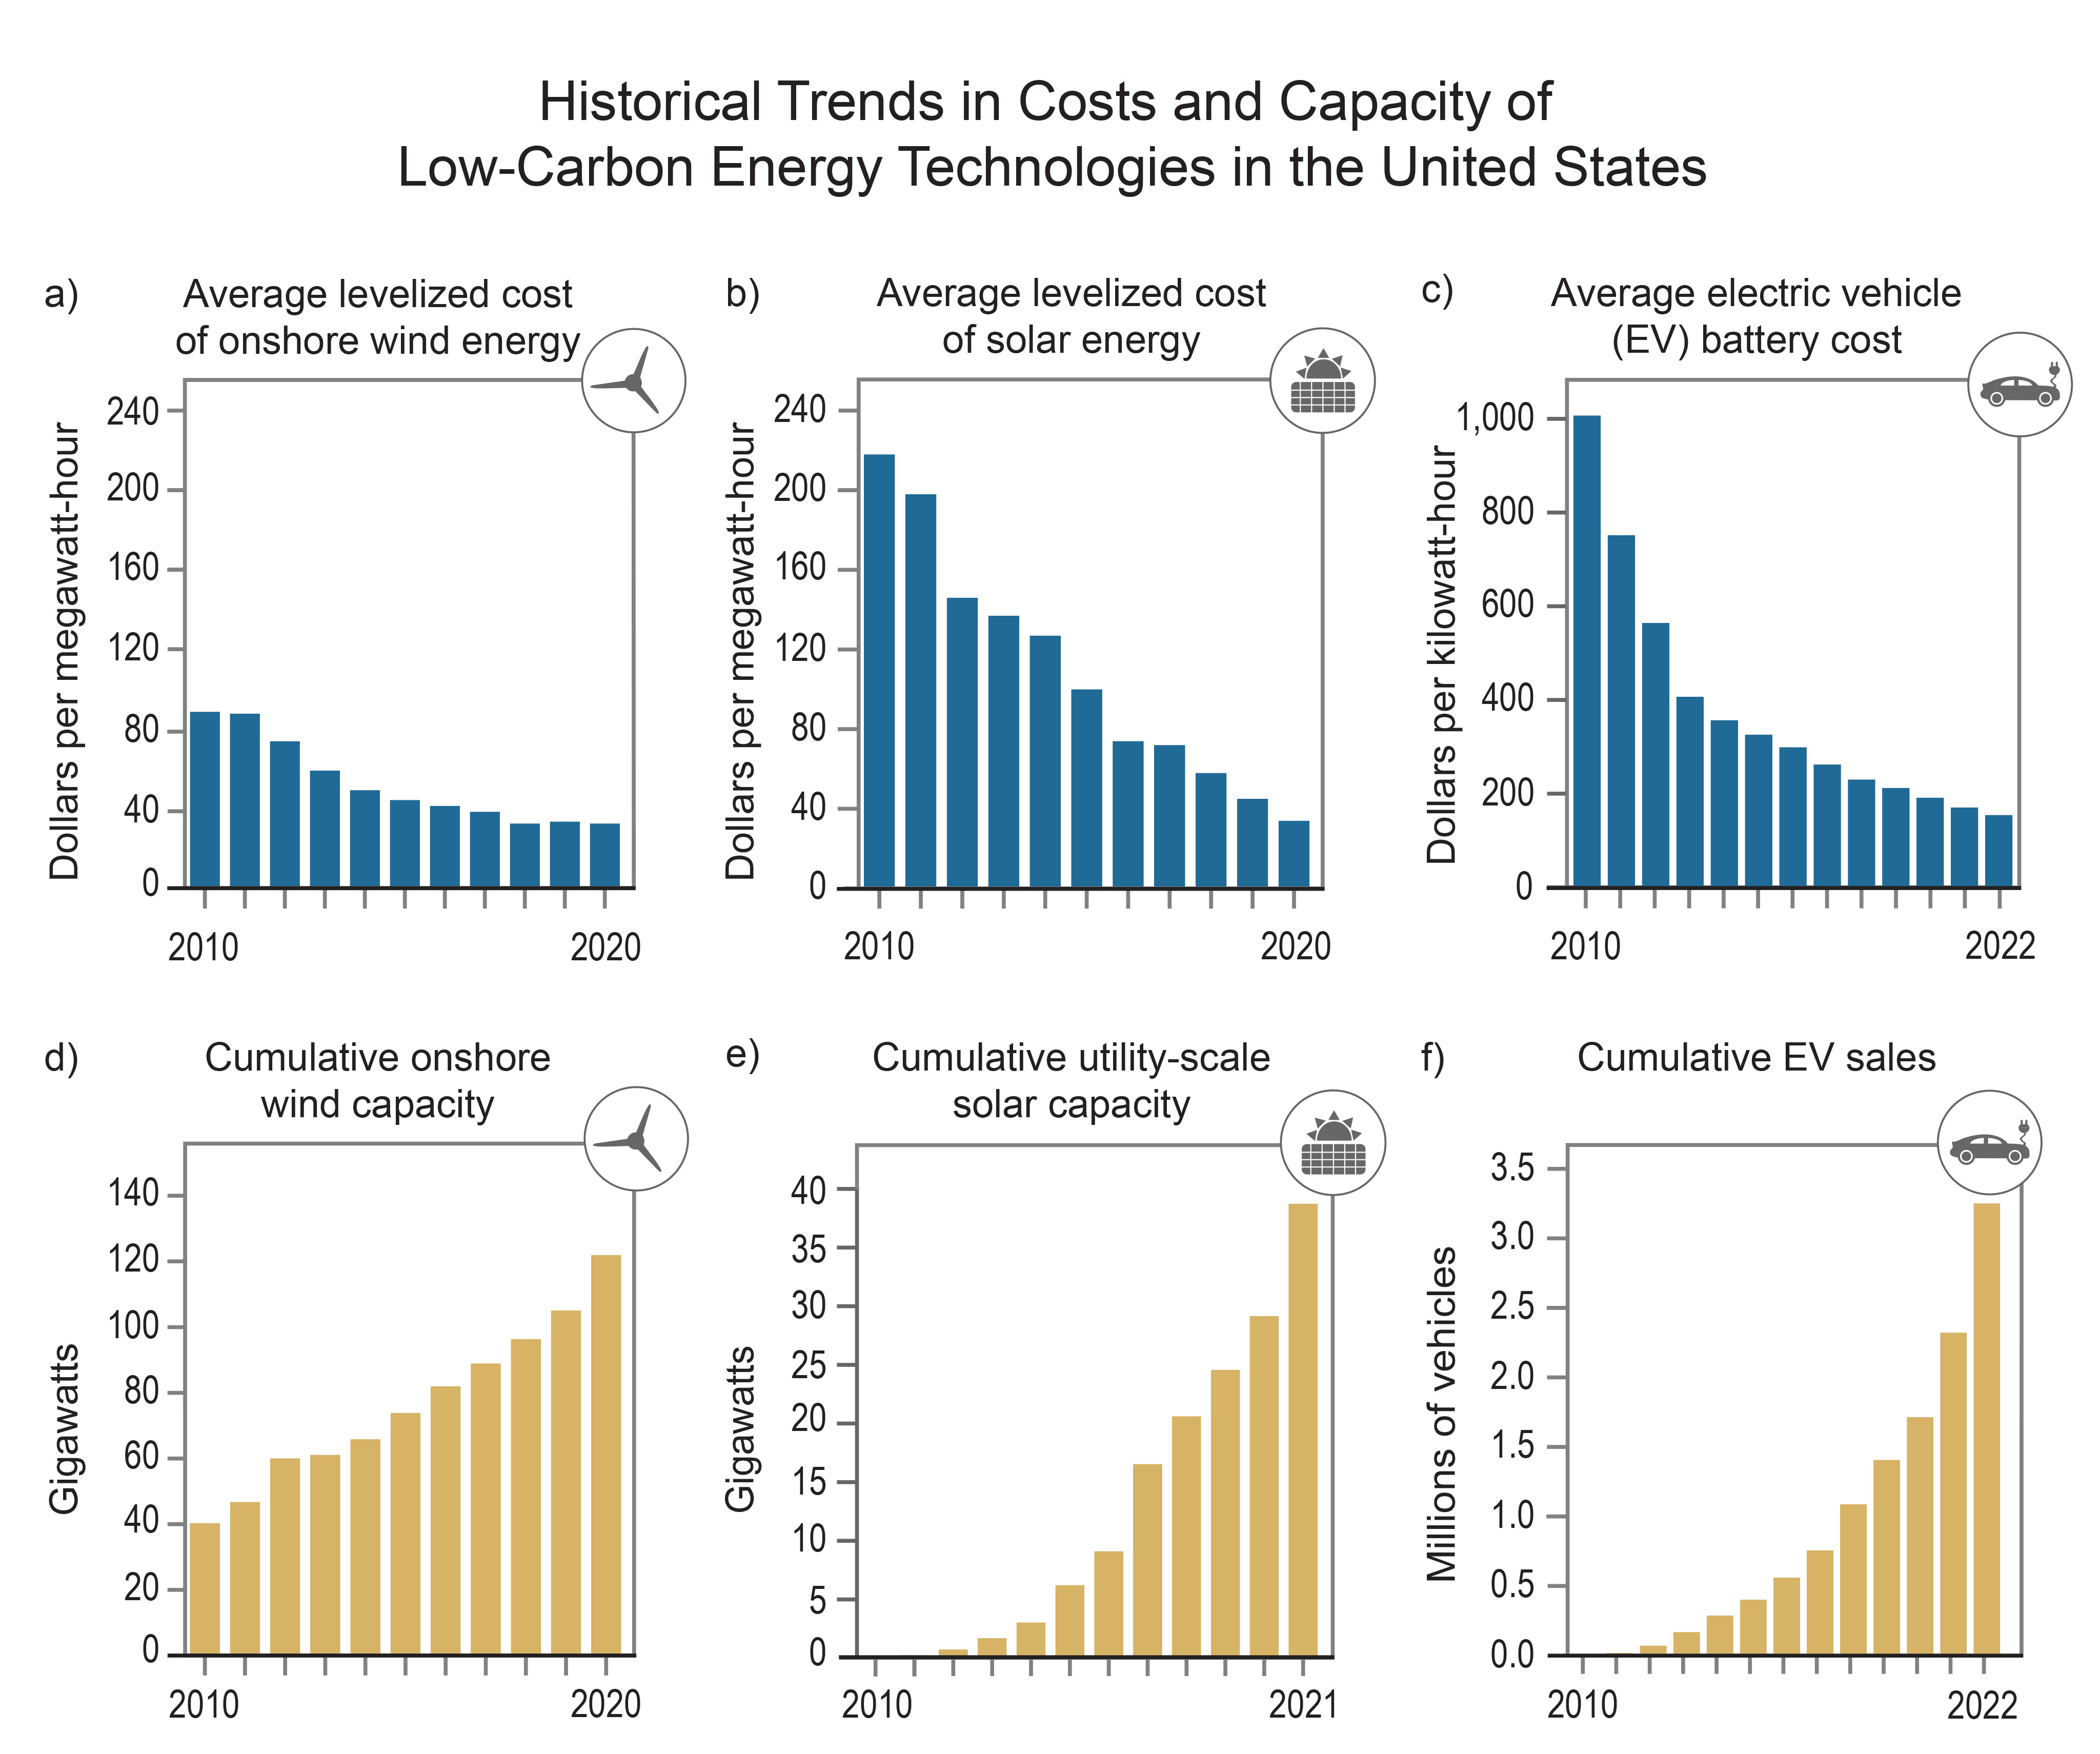 Historical Trends in Unit Costs and Deployment of Low-Carbon Energy Technologies in the United States